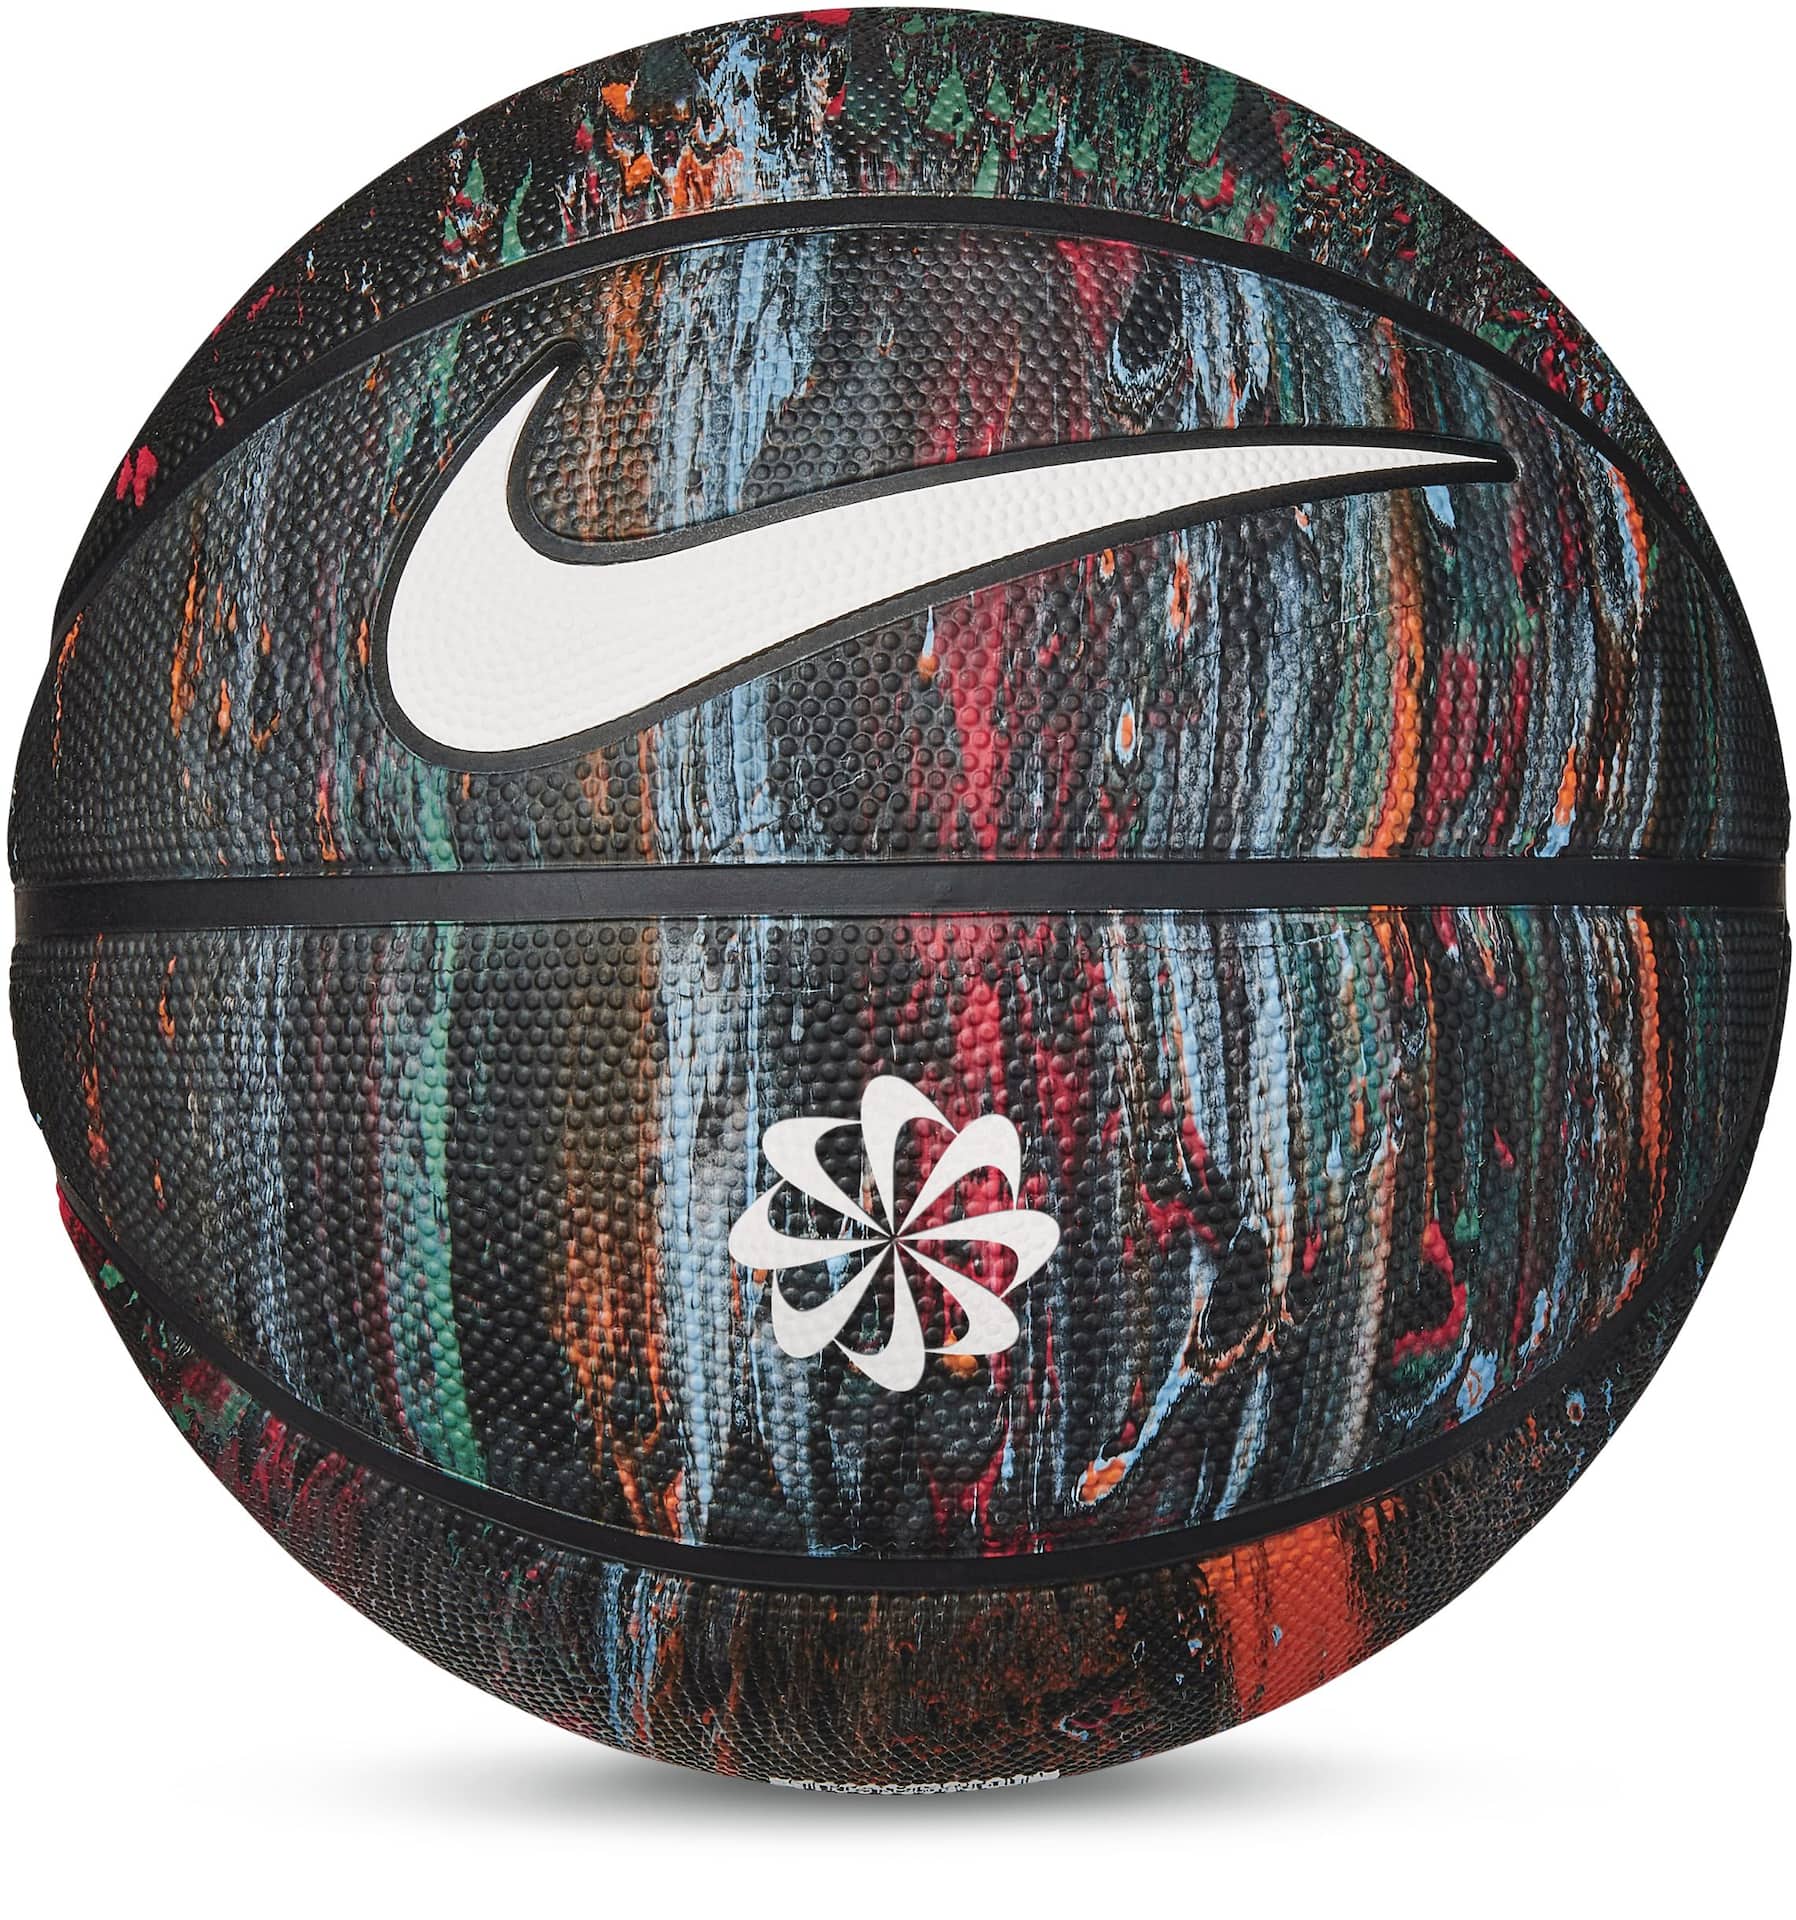 Nike Revival Outdoor Recycled Material Basketball, Official Size 7